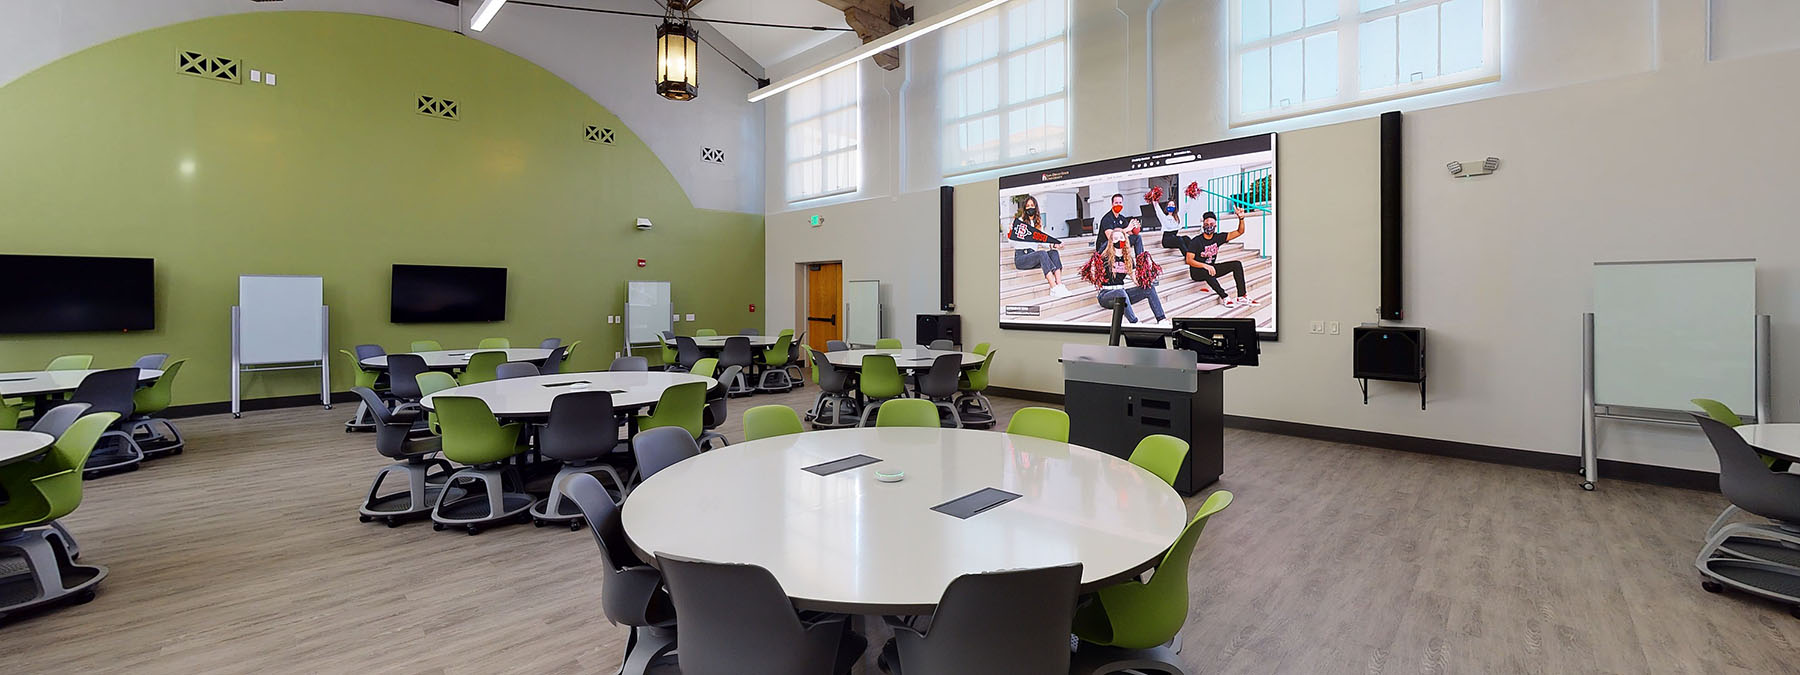 Lecture hall PS 130, redesigned with large, circle tables for collaboration.